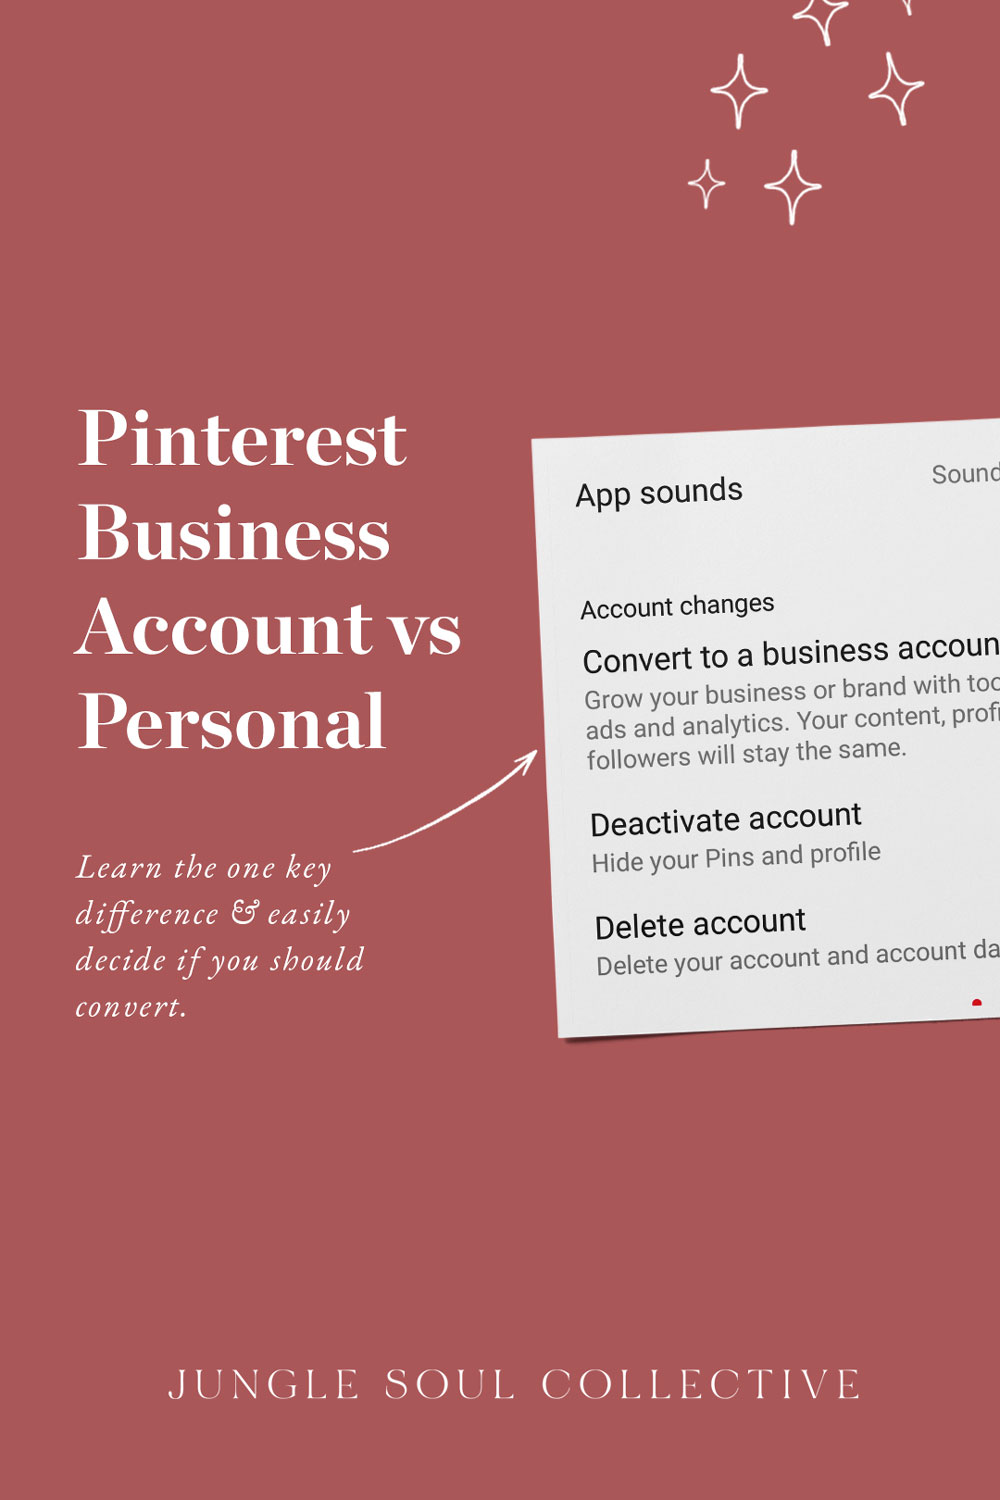 Pinterest business account vs personal